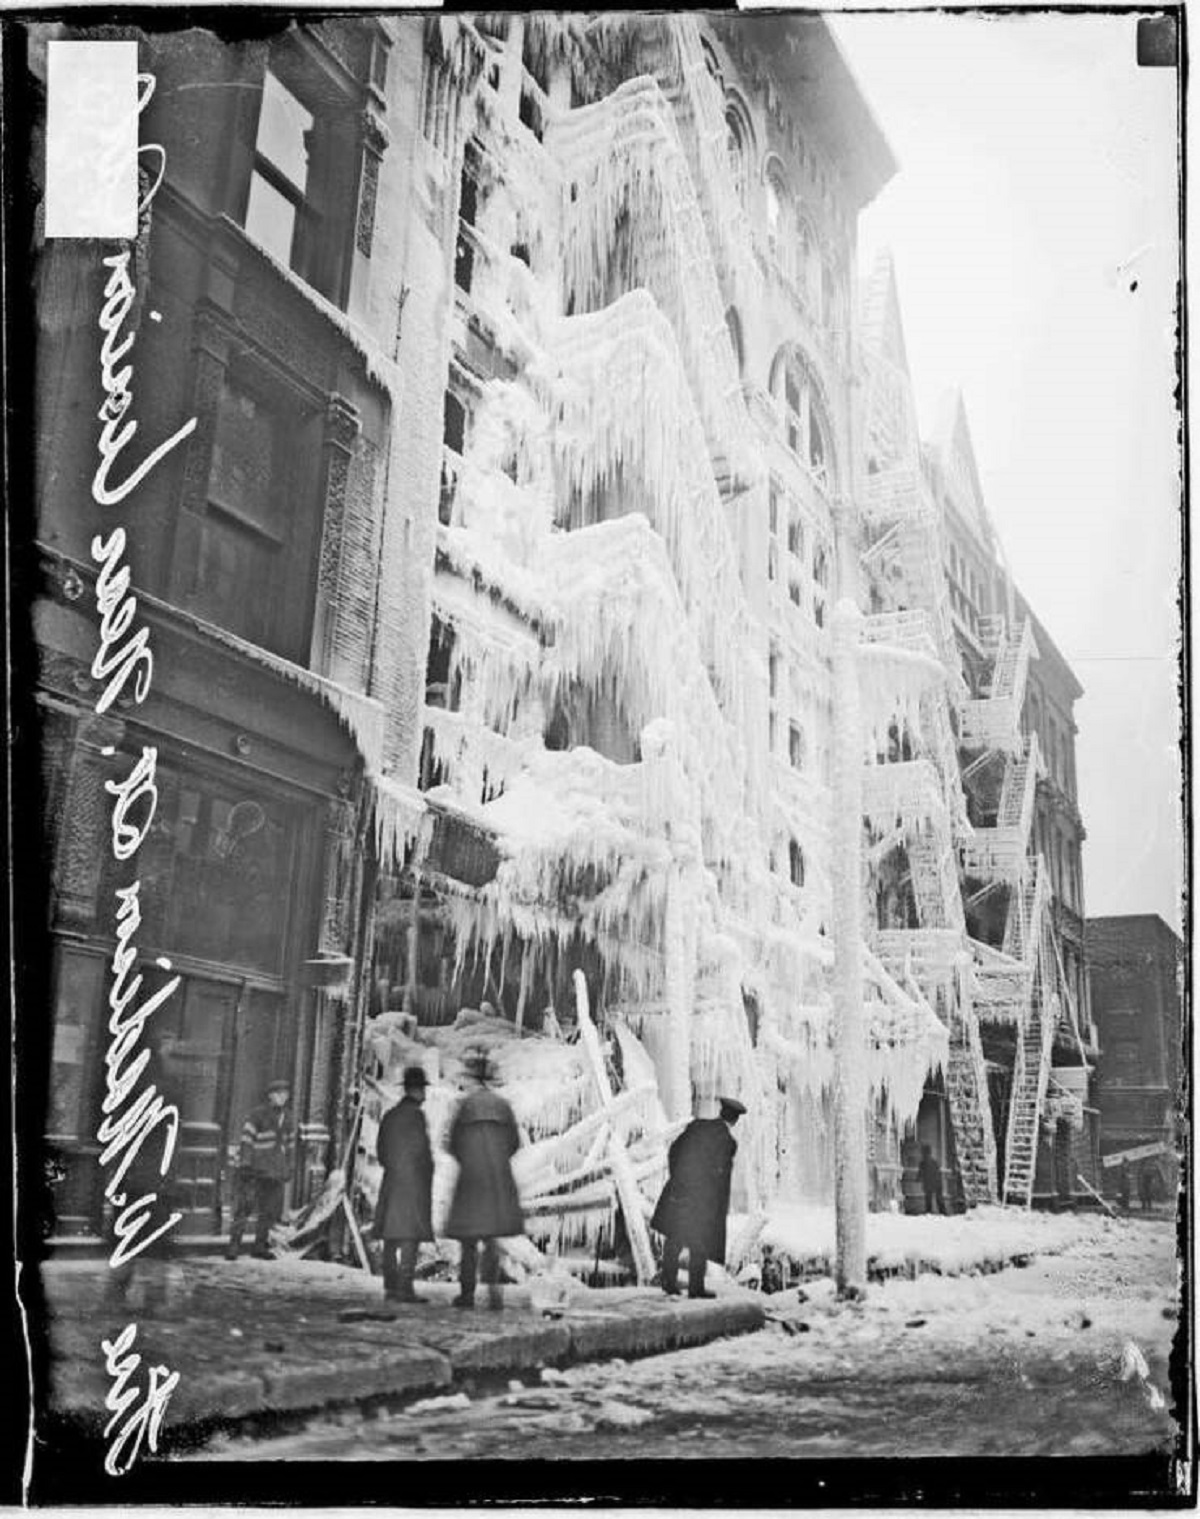 This is what Chicago's Eureka Building looked like after a winter fire was put out by the Fire Department: